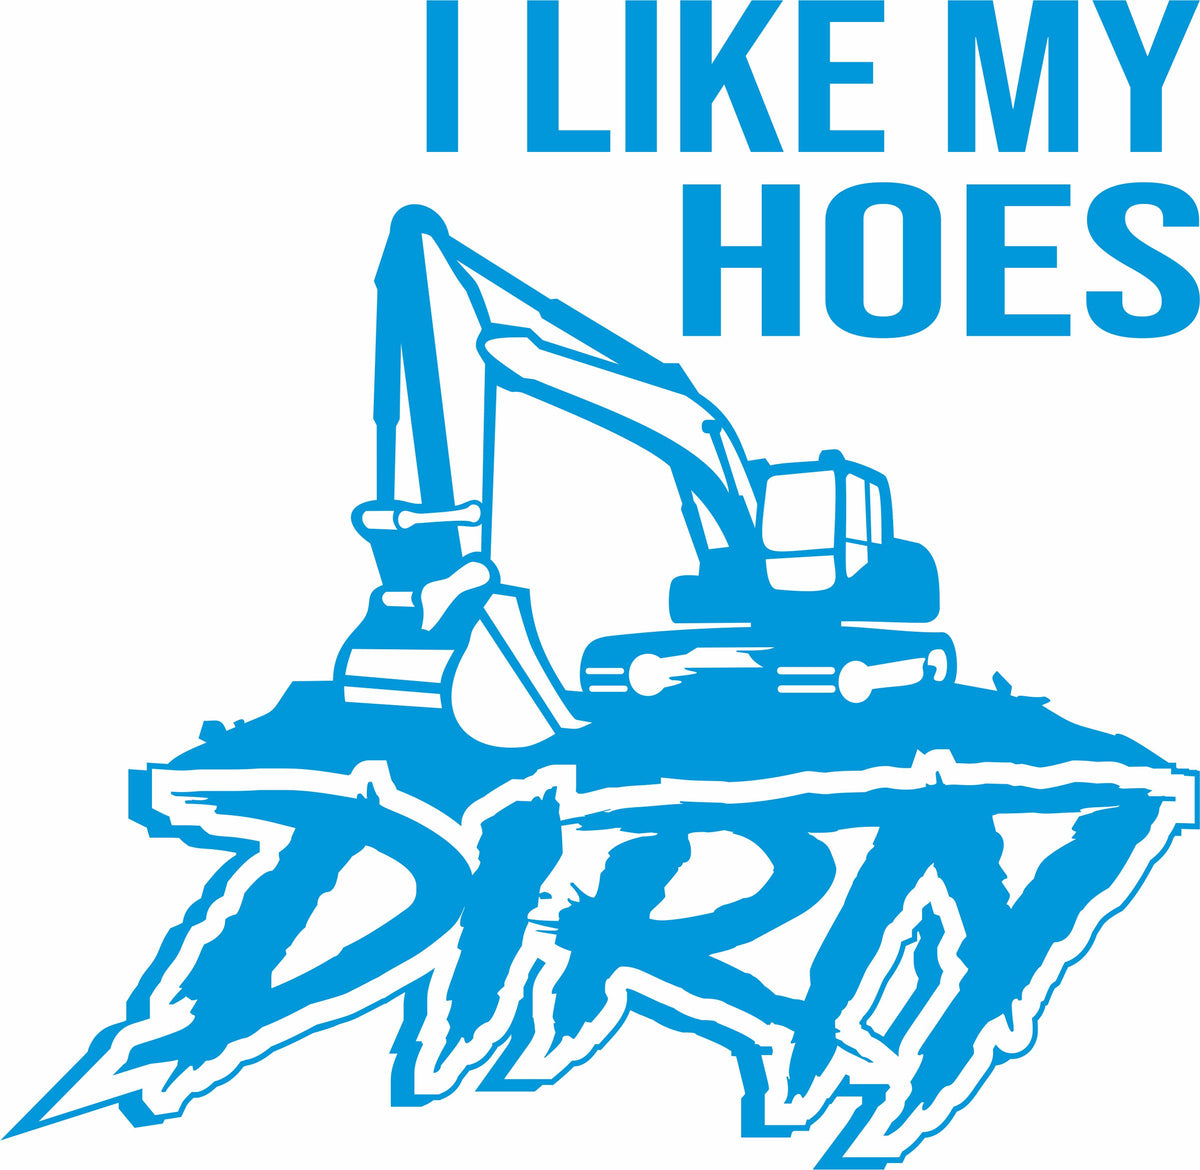 I Like My Hoes Dirty Vinyl Decal (Free Shipping)